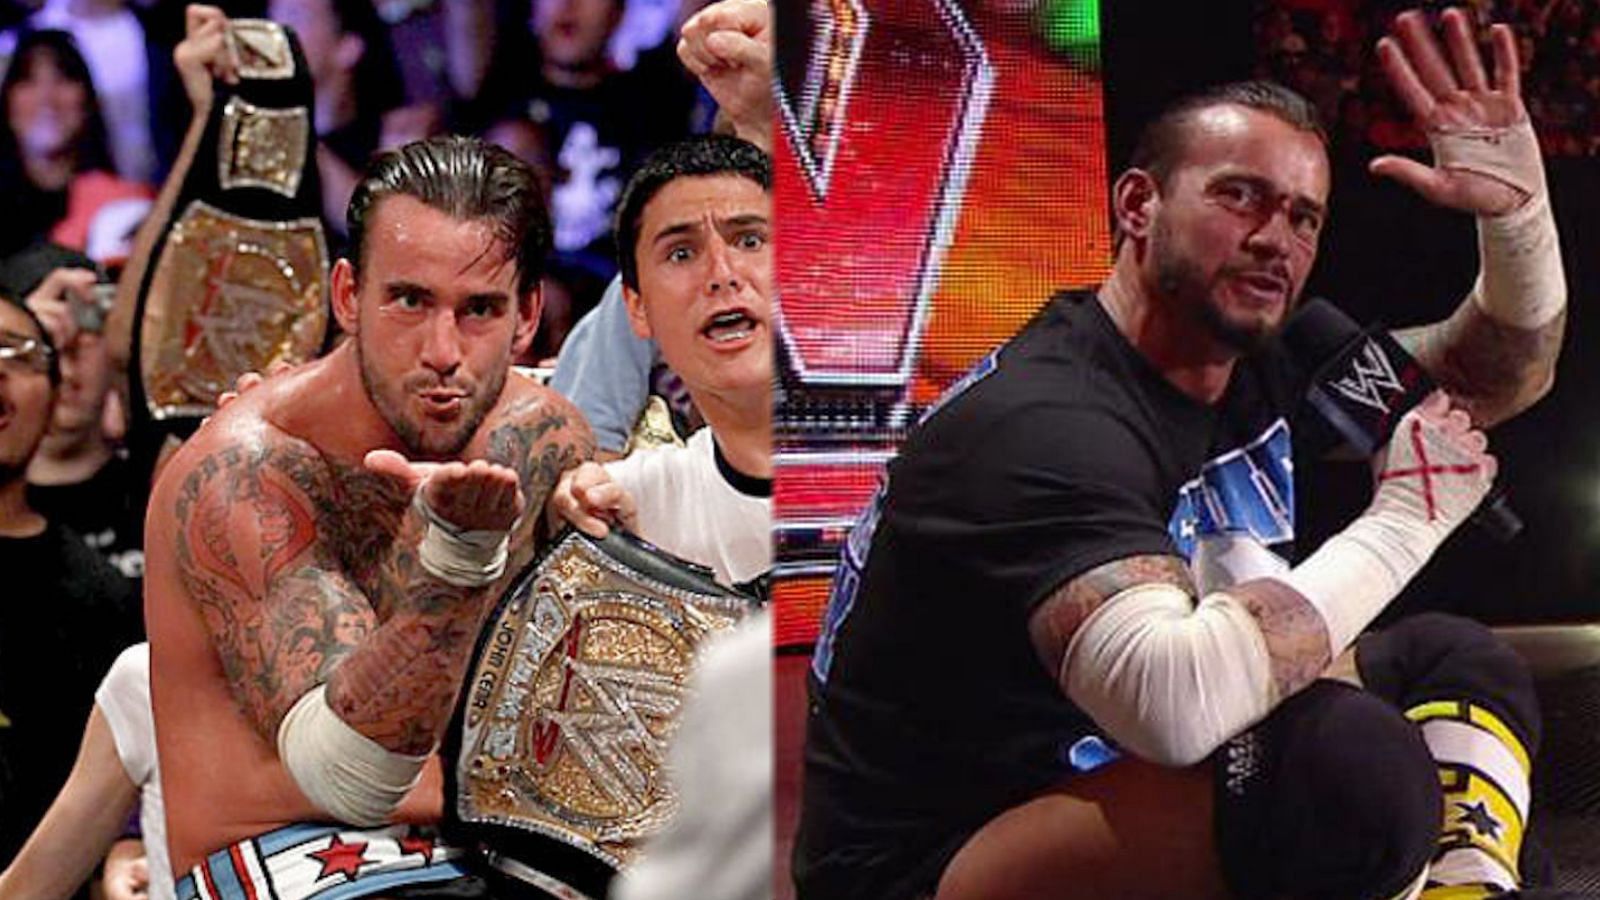 Punk was one of the biggest names in WWE before he left the promotion.